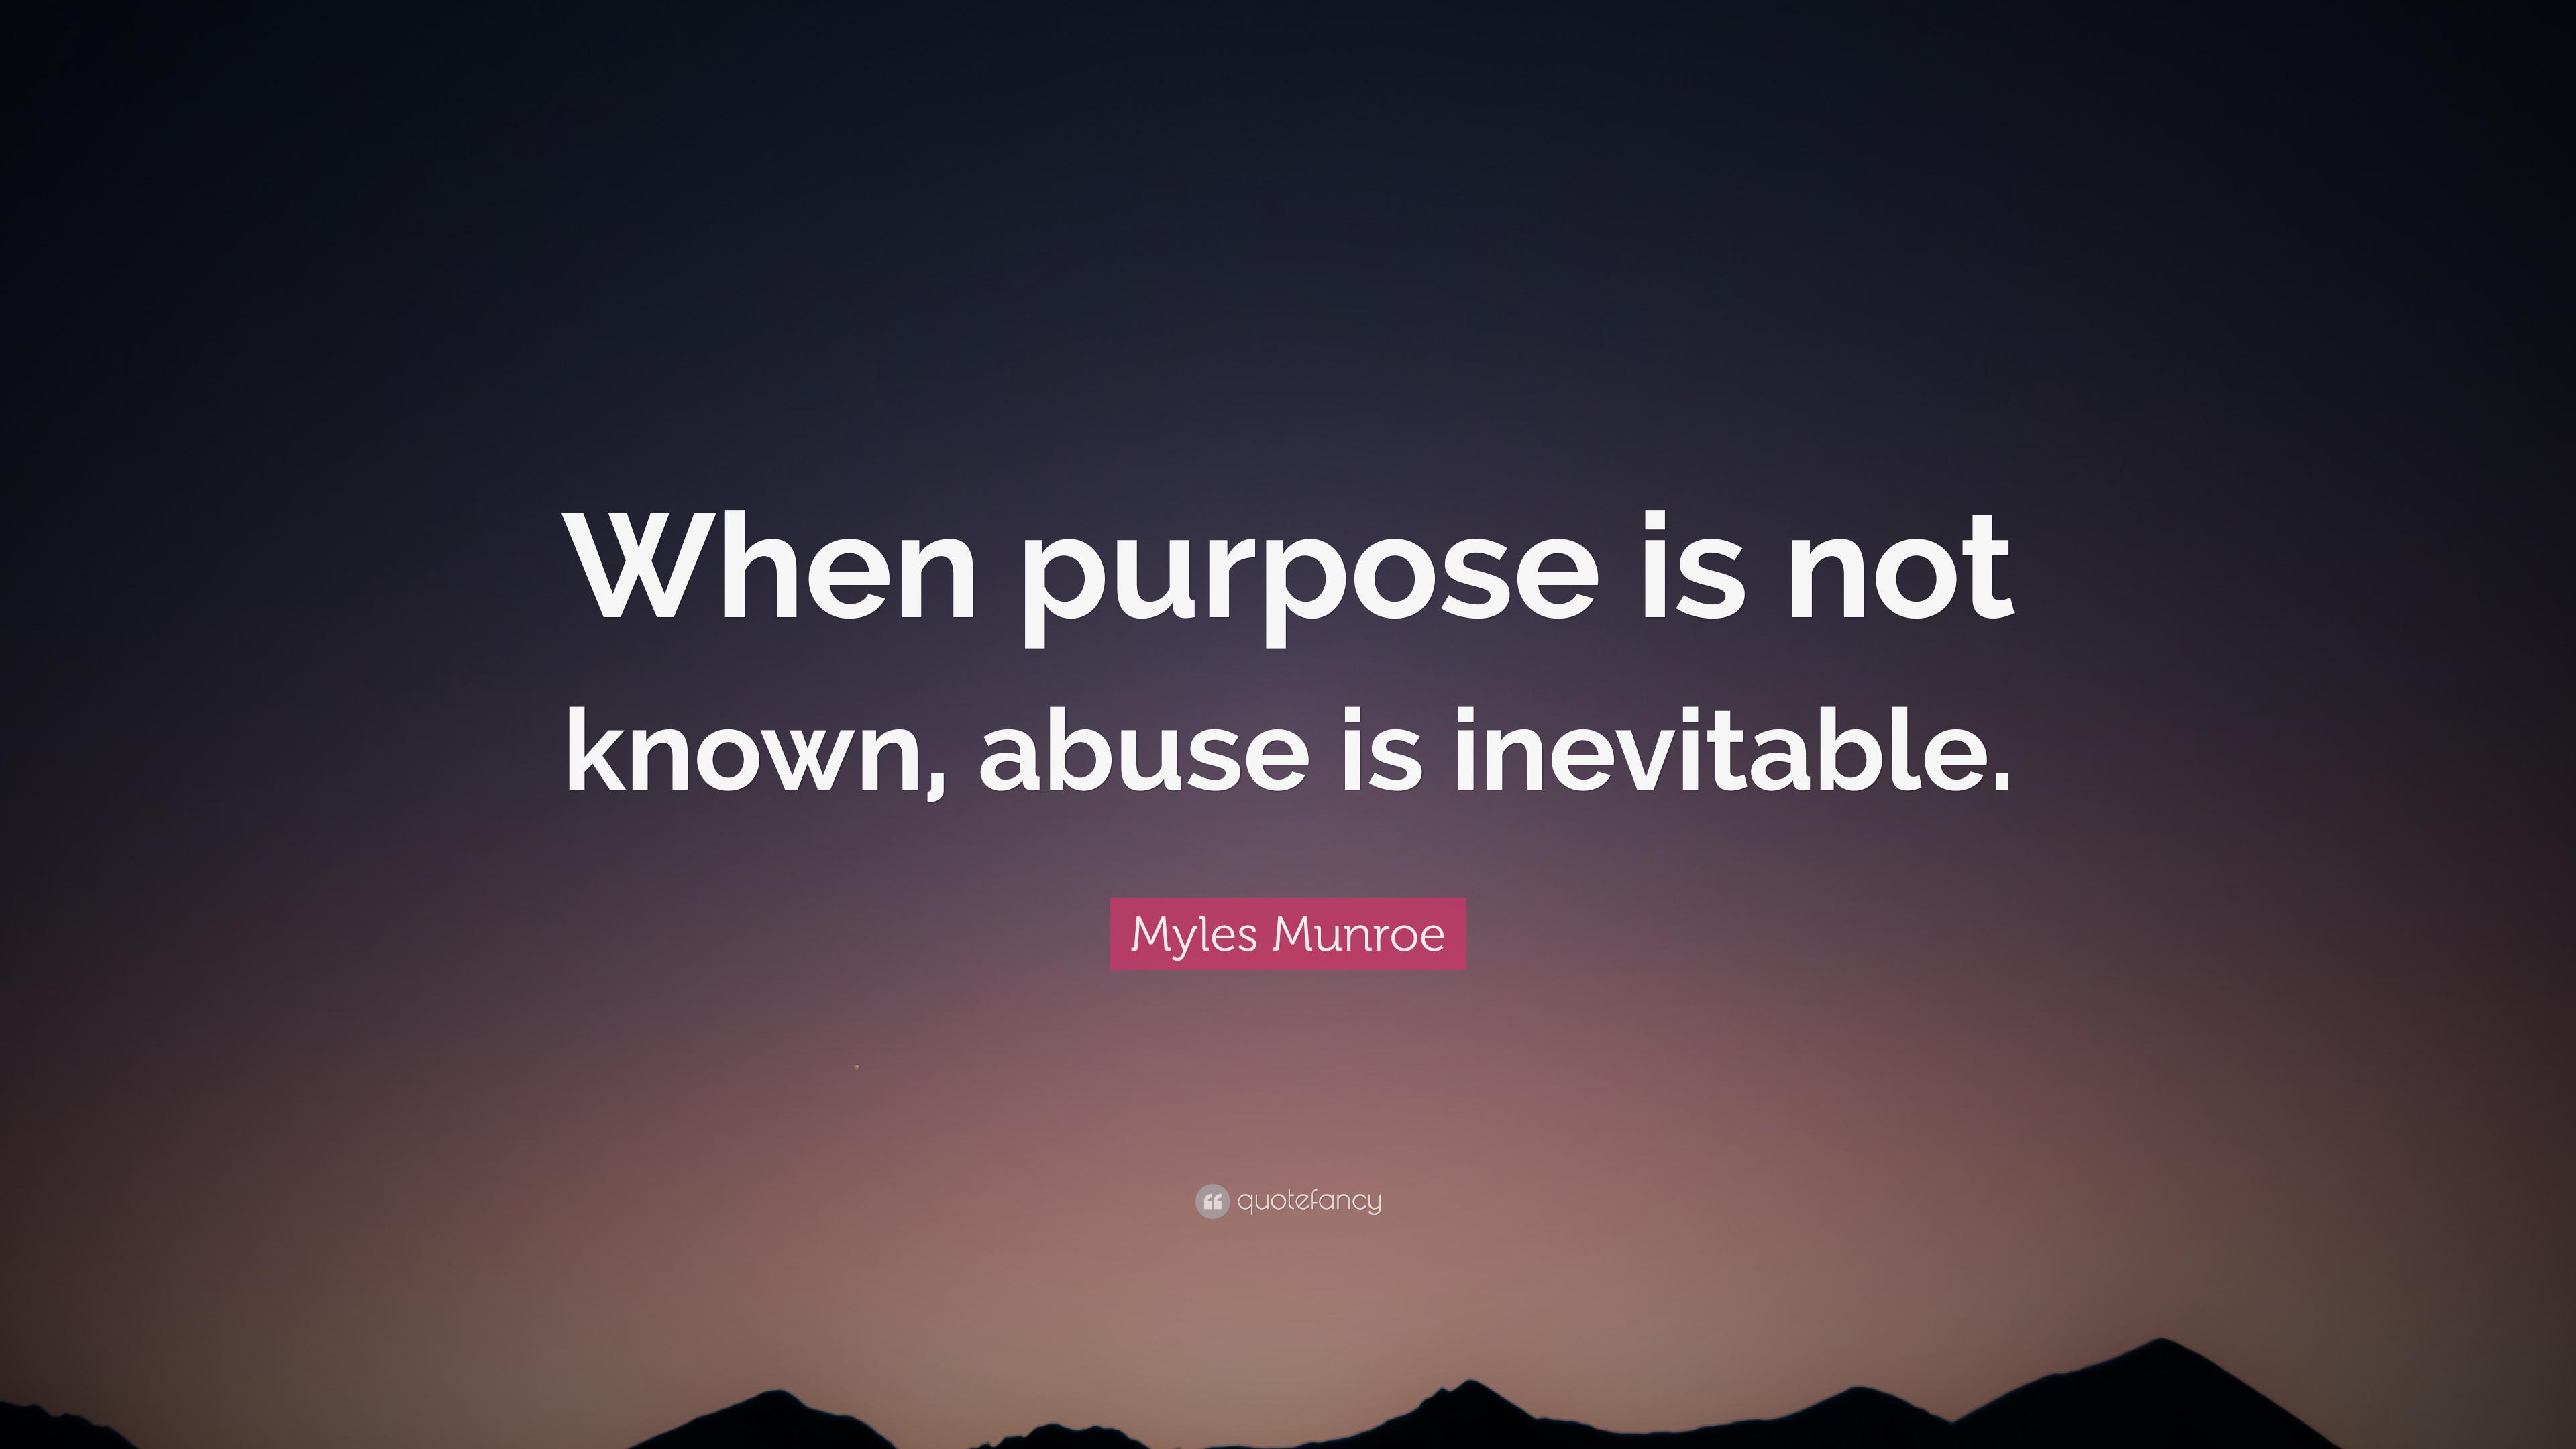 Myles Munroe Quote: “When purpose is not known, abuse is inevitable